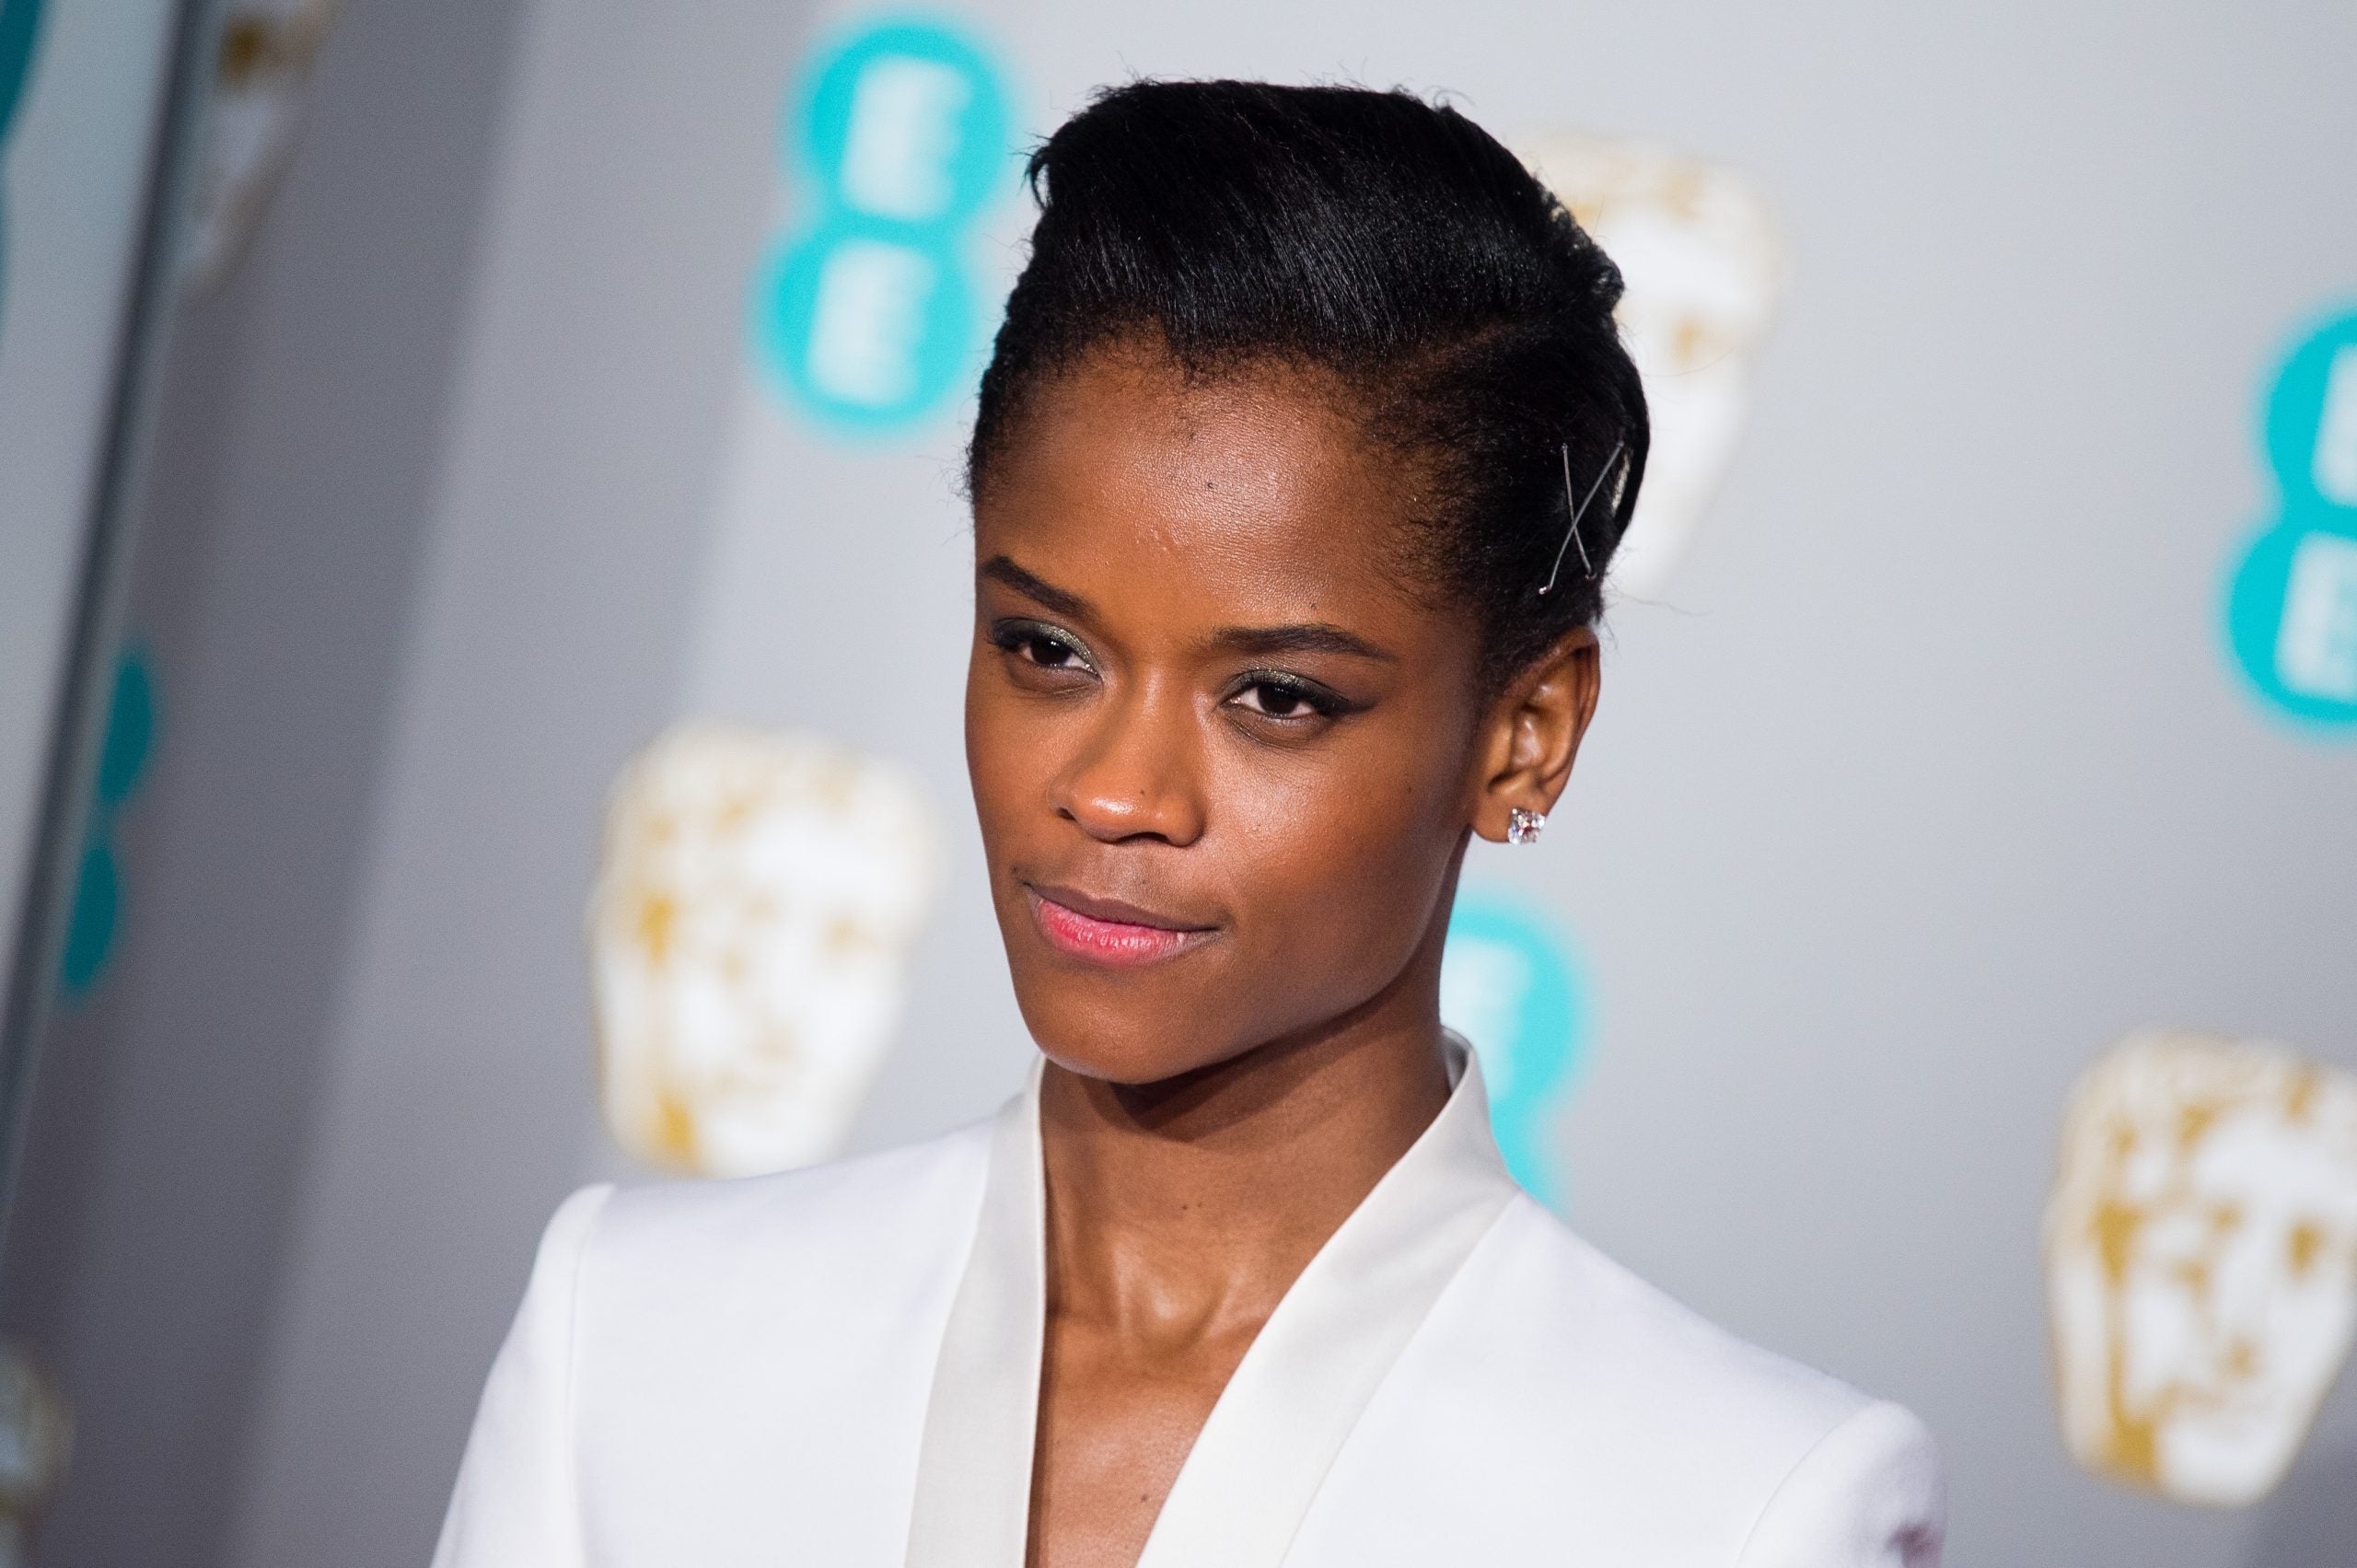 Letitia Wright Denies Accusations That She Pushed Anti-Vax Views on "Black Panther 2" Set